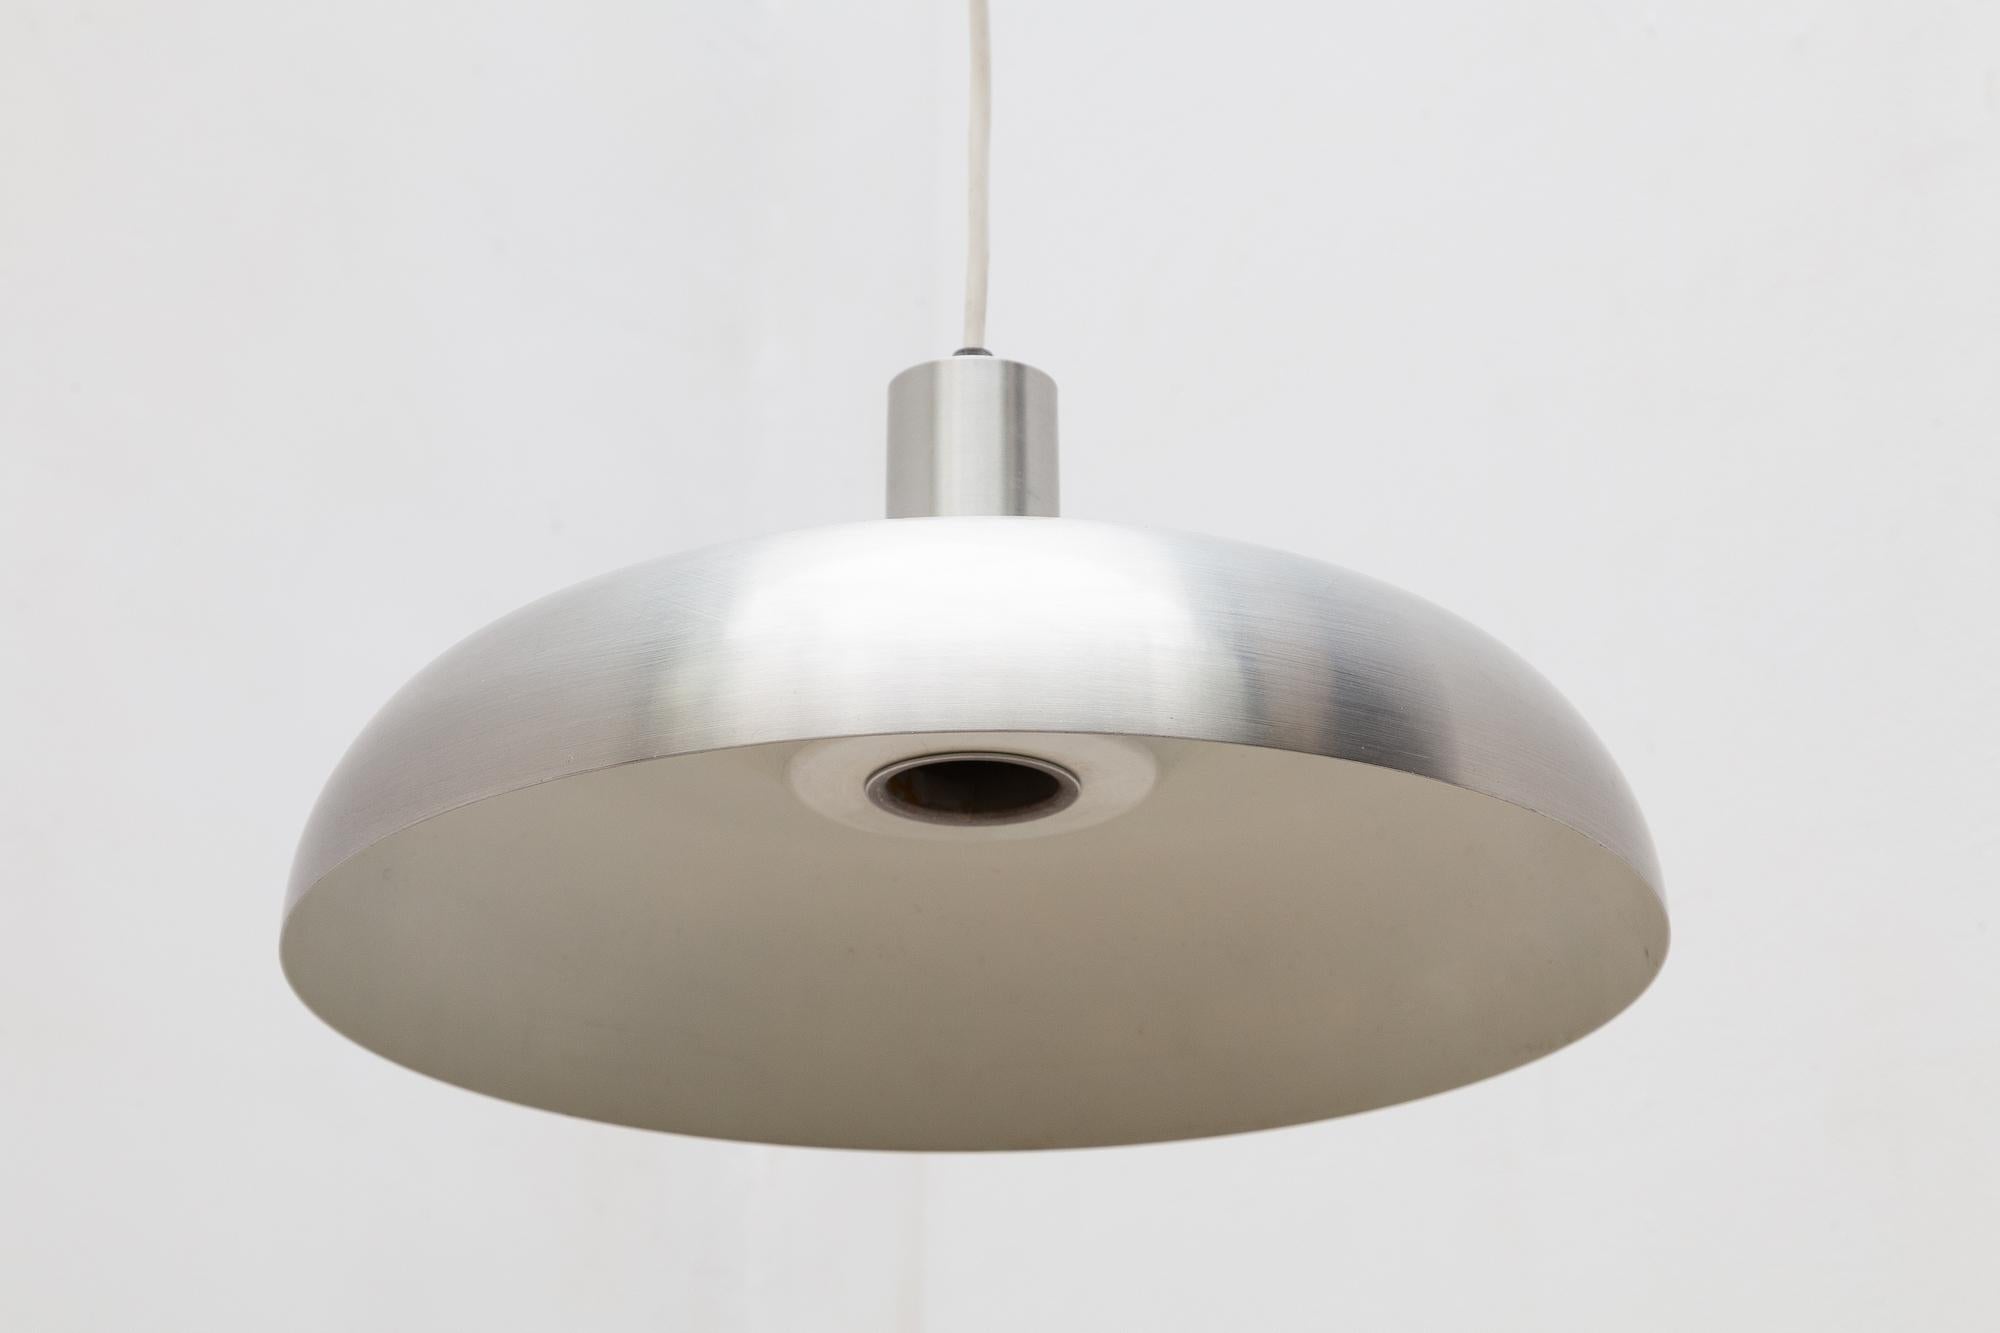 Vintage midcentury pendant lamp by RAAK, Amsterdam. Modernist brushed metal shade with enameled white interior. The extra-long cord can be hung to the desired height.
Dimensions: 40 cm W. x 90 cm.H.

Shipping free.